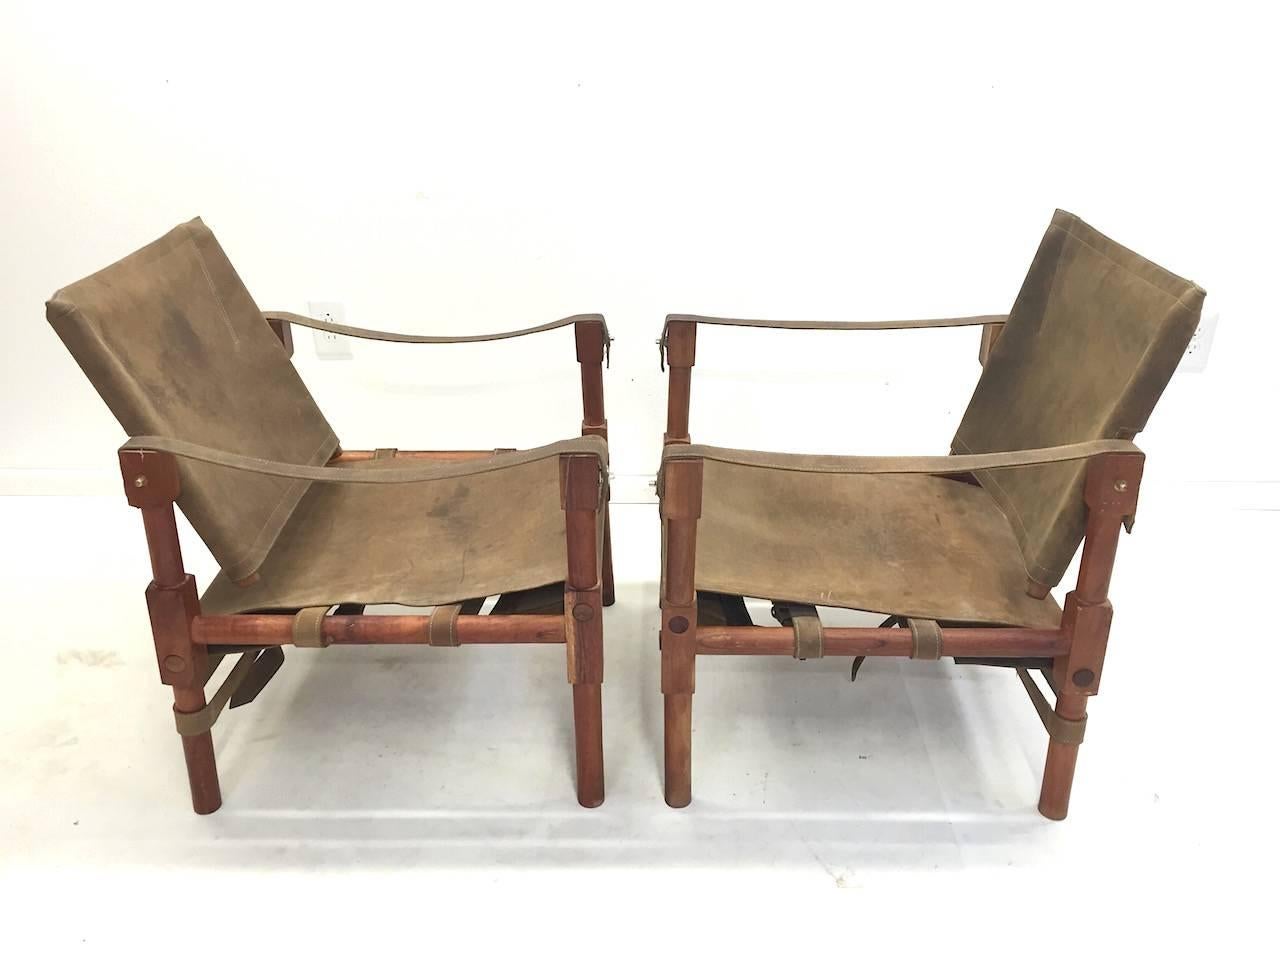 Pair of vintage safari lounge chairs. Very nicely constructed with fine brass hardware. Seats and backs have a patina from age.